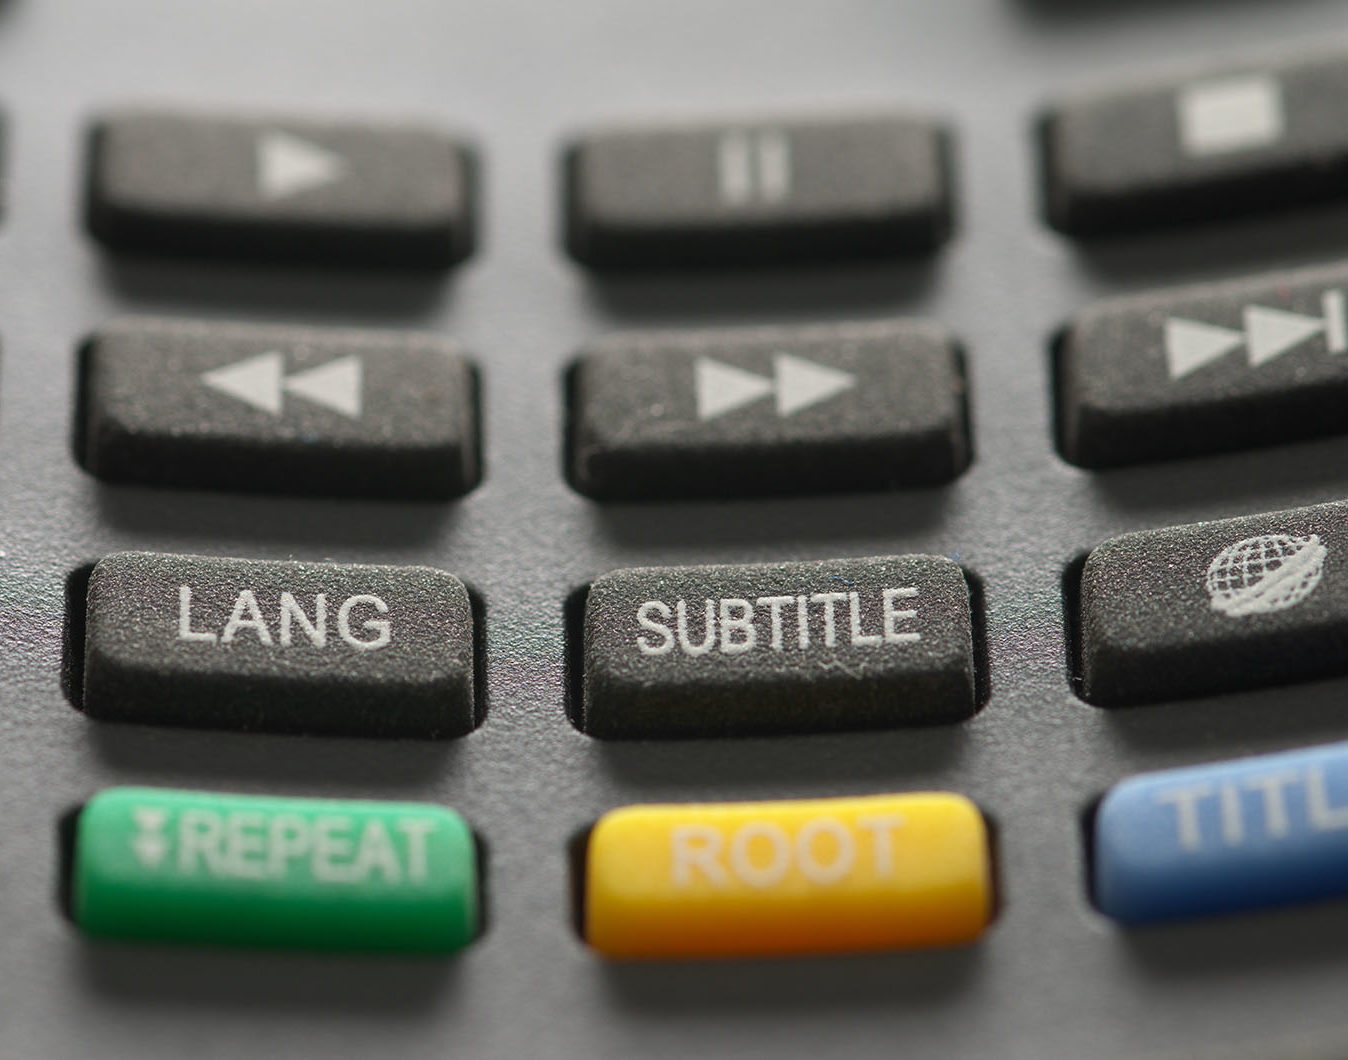 A closeup of a remote, showing the language and subtitle buttons.